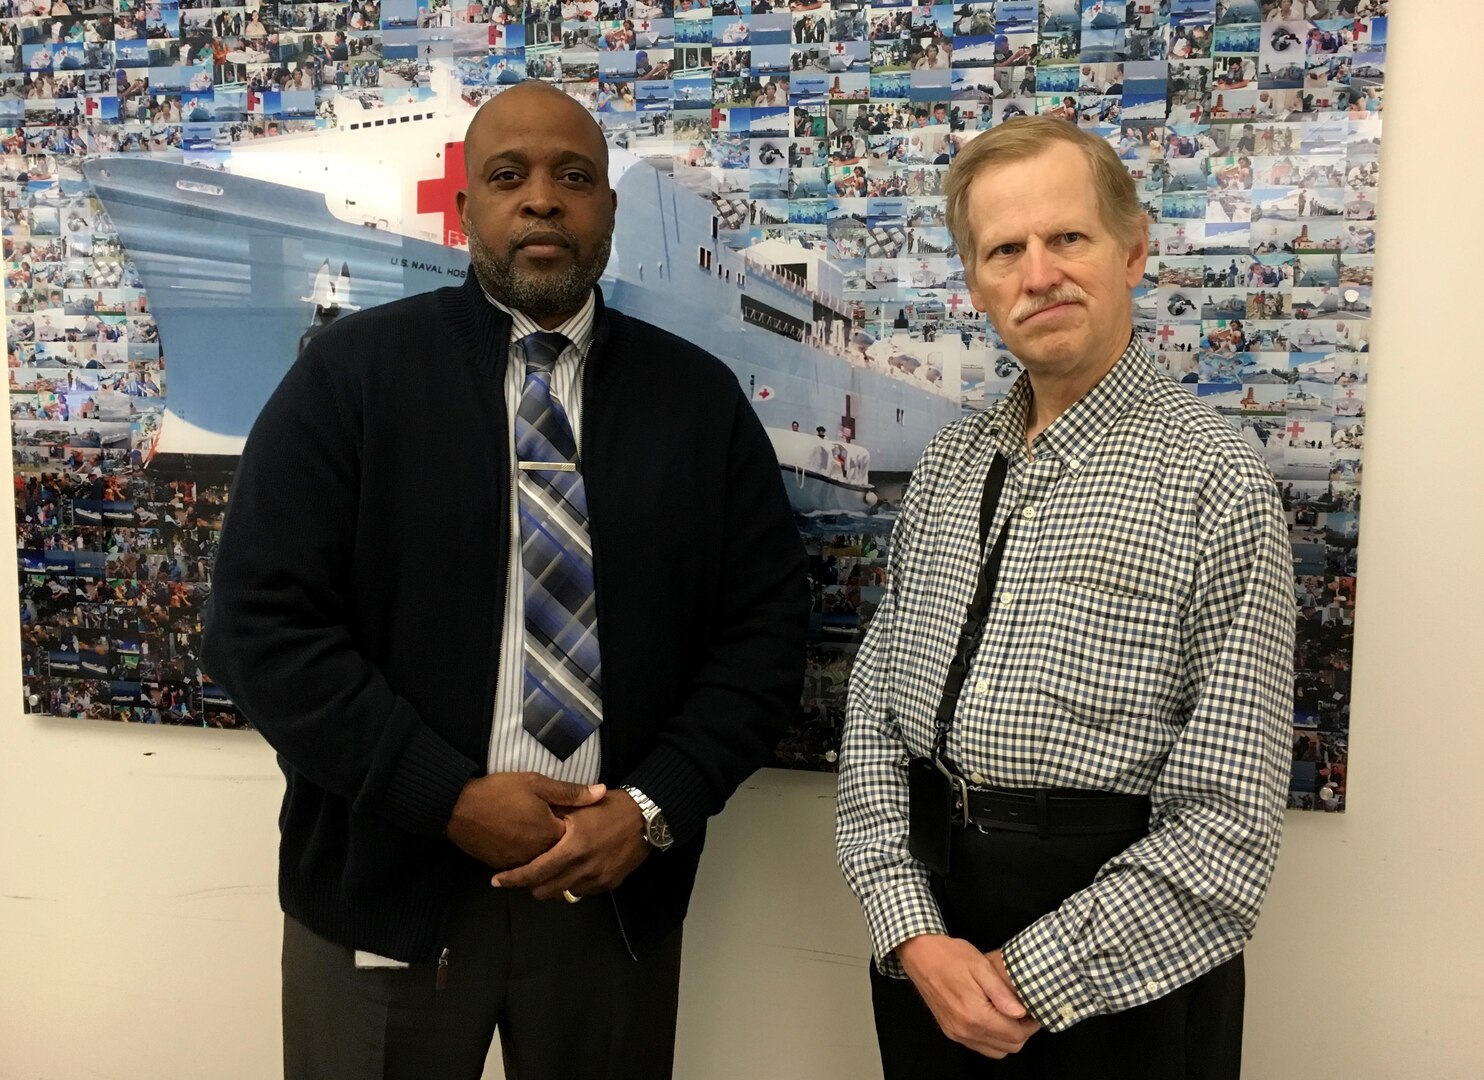 Kenneth Cummings (left) performed the Heimlich maneuver June 22 on his co-worker Arthur Tehson, who was choking on a doughnut. The Medical supply chain employees have sat behind each other since March 2015.